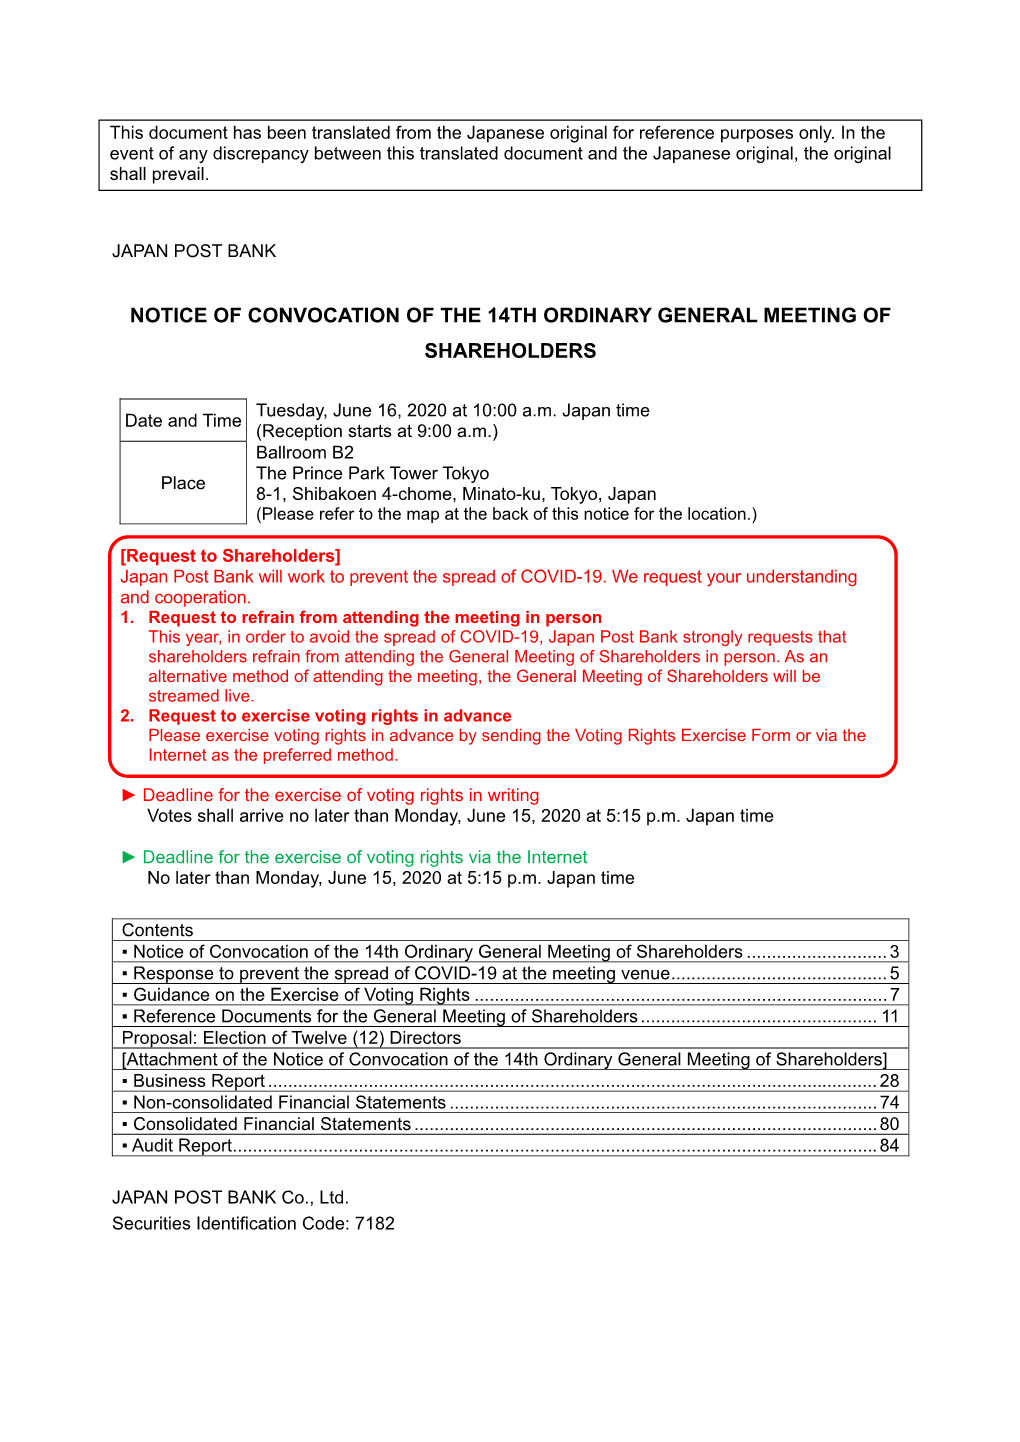 Notice of Convocation of the 14Th Ordinary General Meeting of Shareholders